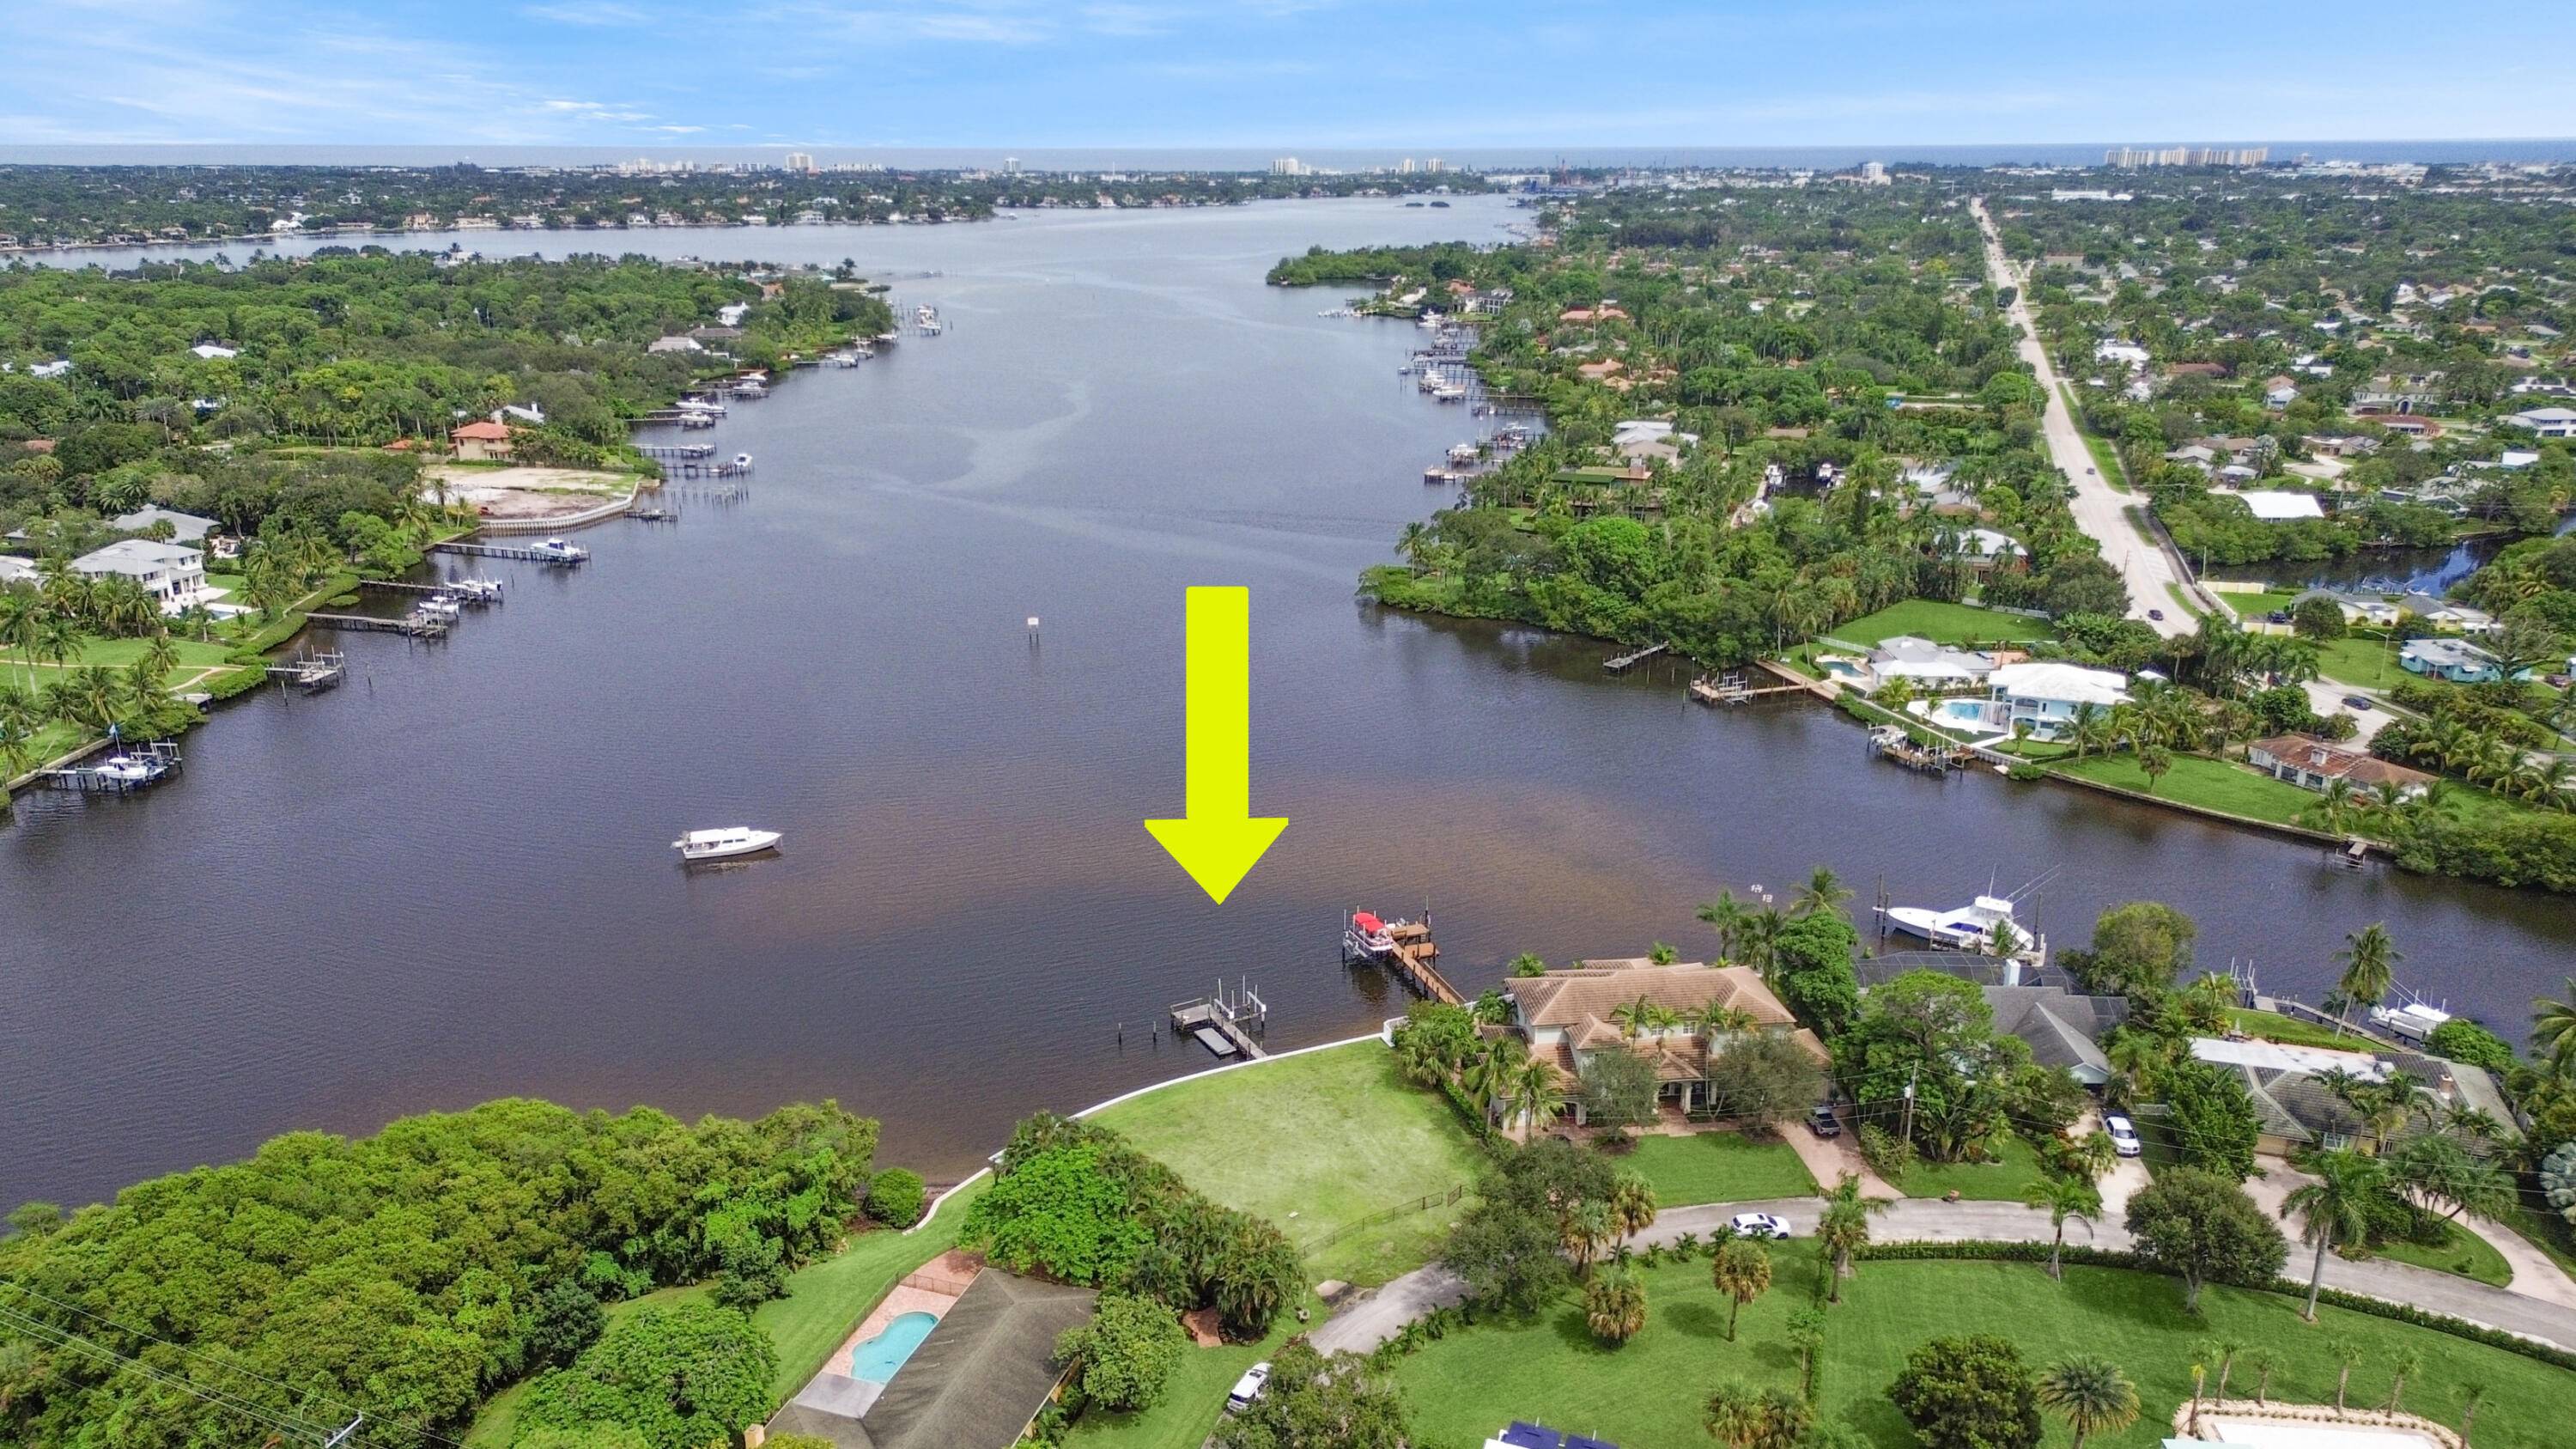 Introducing 18040 Via Rio, a hidden gem nestled on the banks of the SW Fork of the Loxahatchee River.